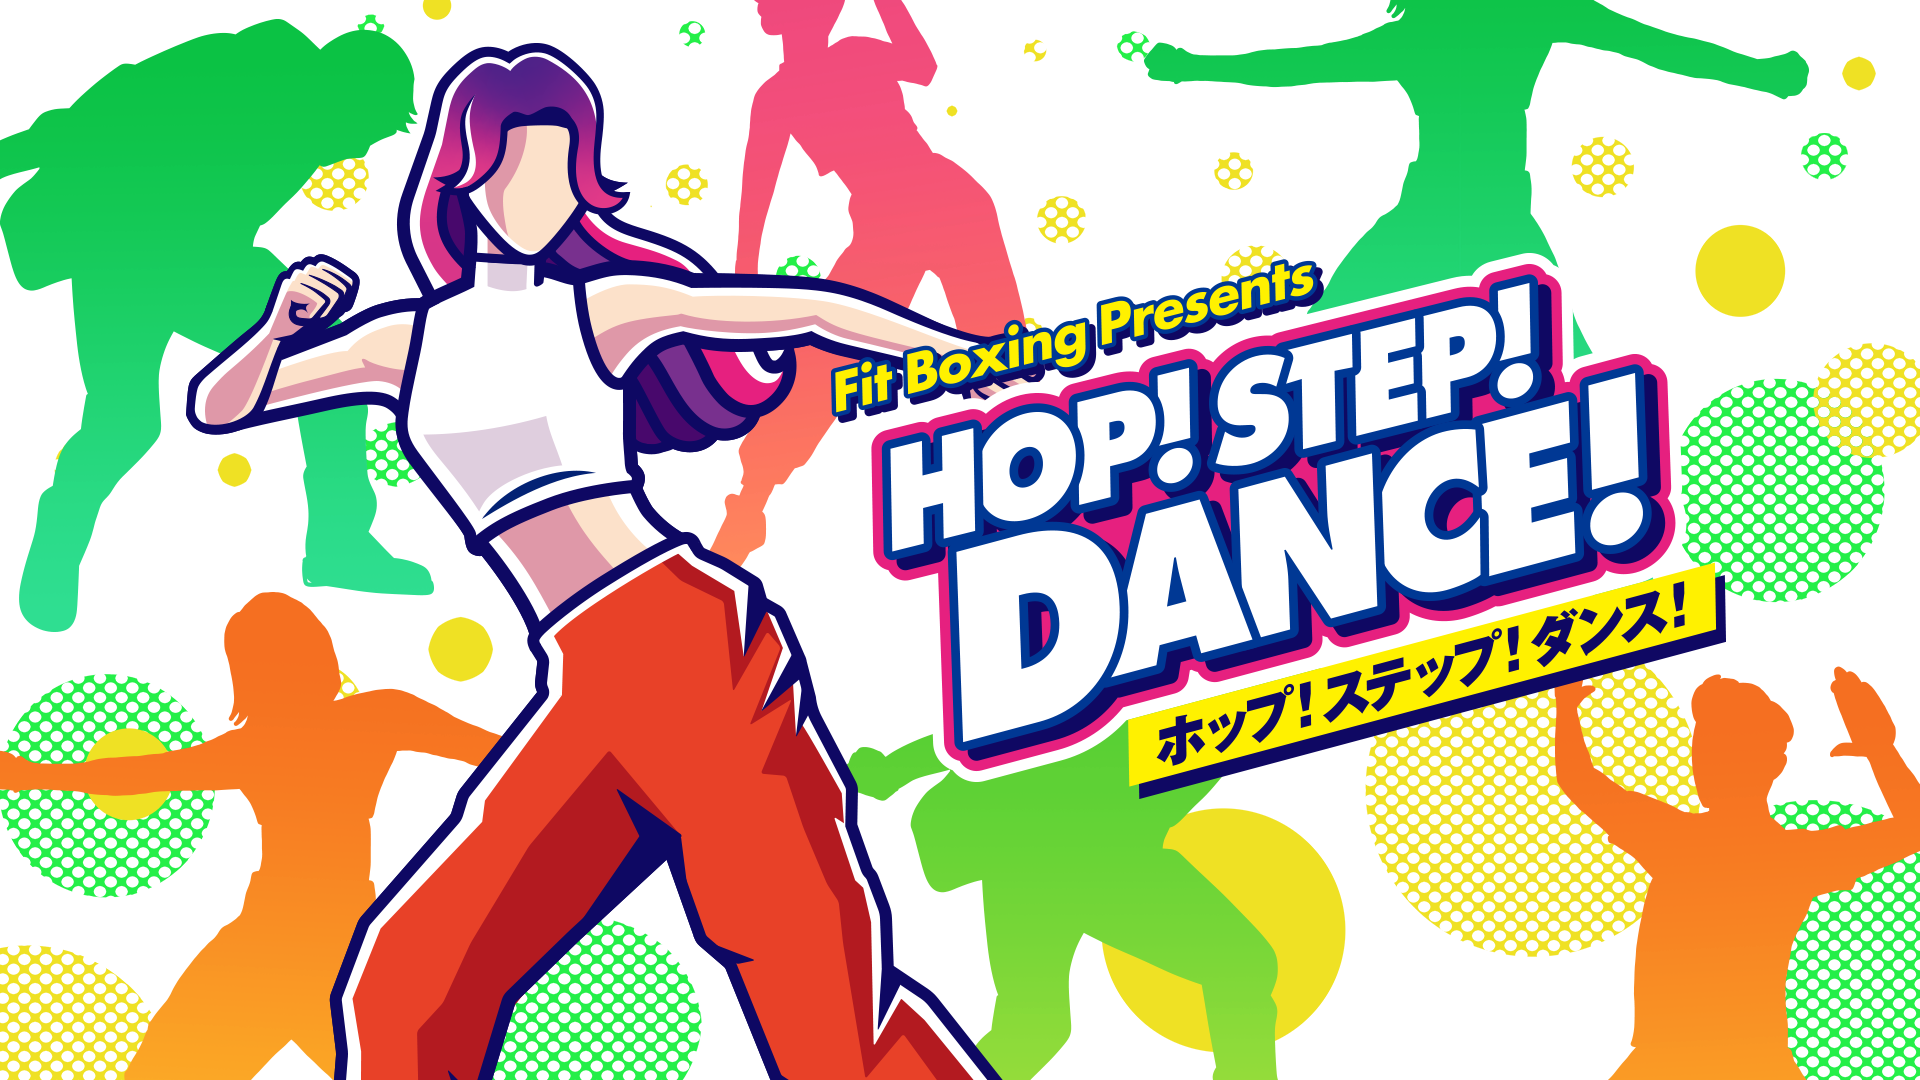 Nintendo Switch ソフトFit Boxing Presents「HOP! STEP! DANCE!」アジア地域での発売開始のお知らせ1